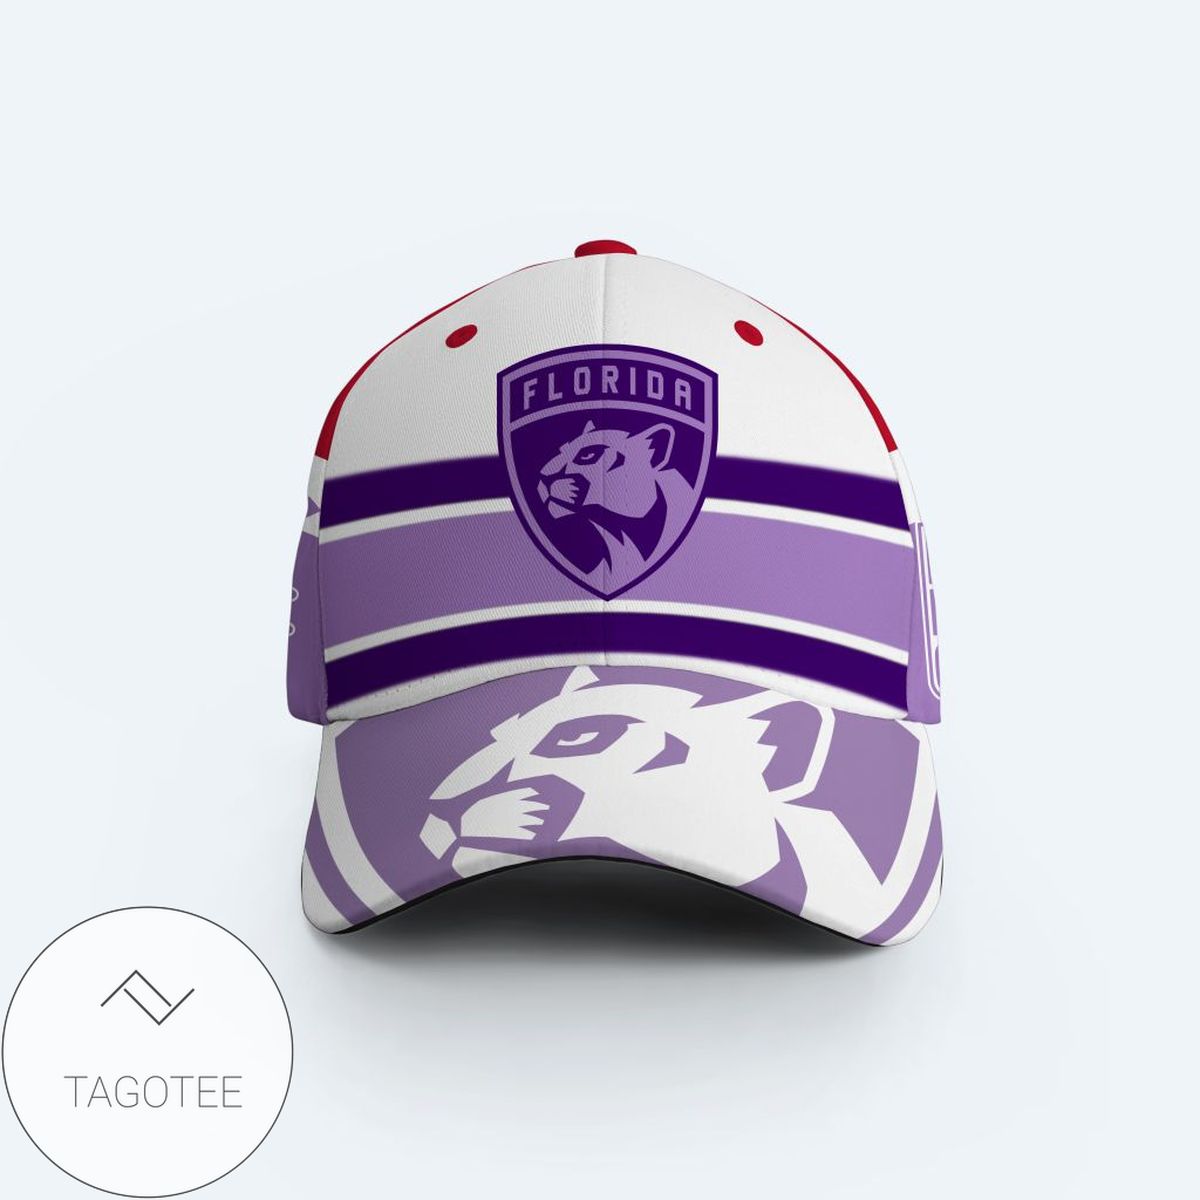 NHL Florida Panthers Fights Cancer Cap